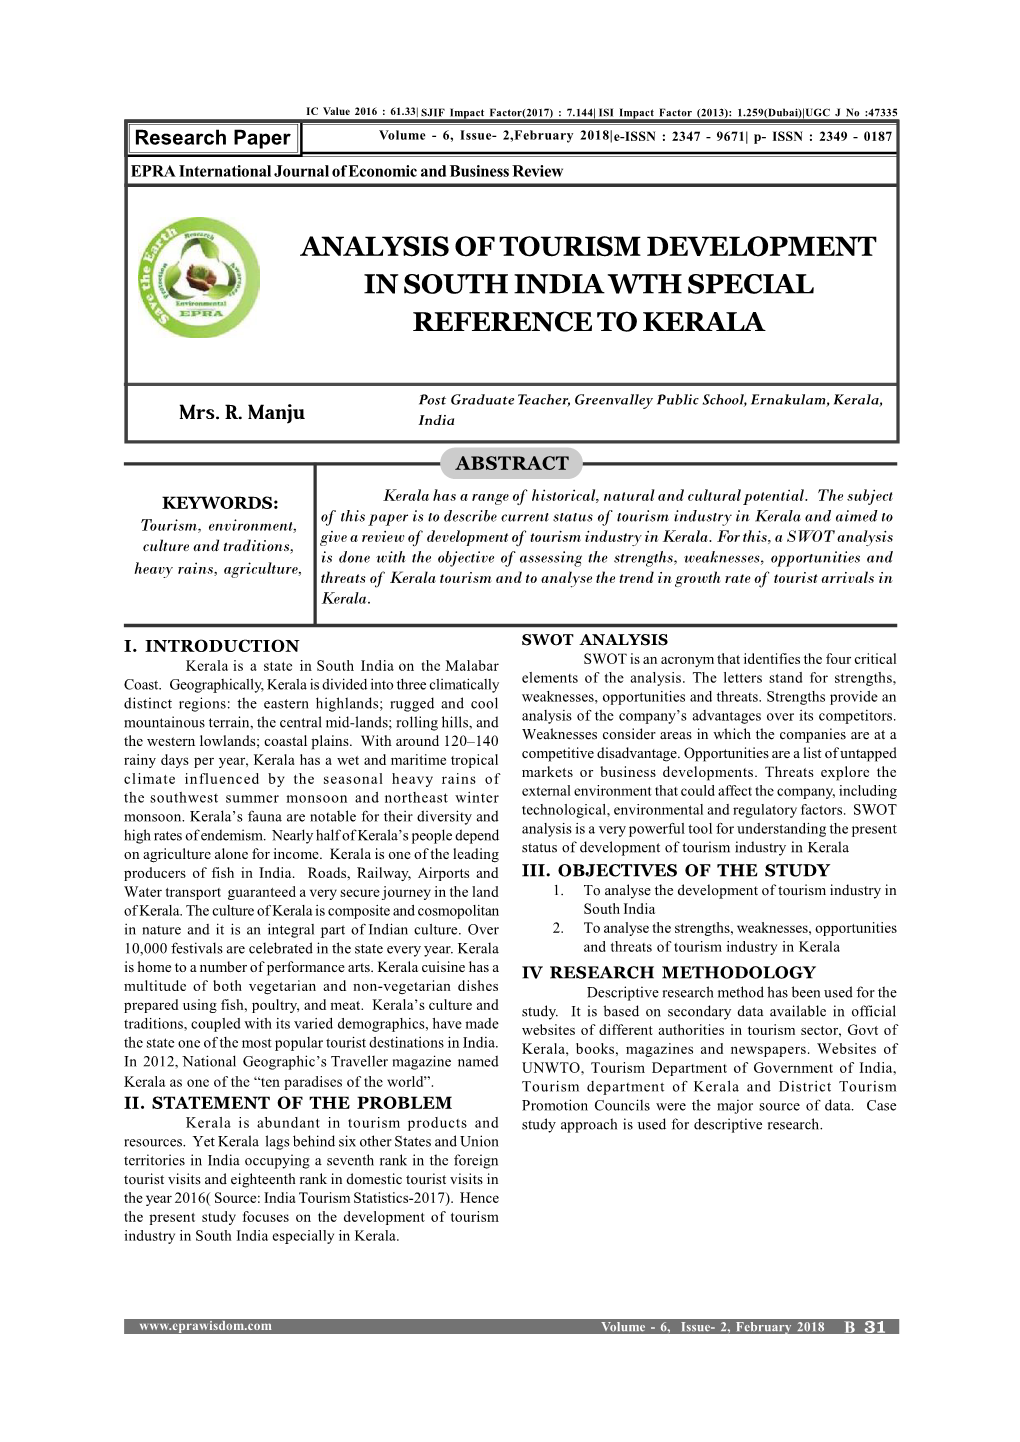 Analysis of Tourism Development in South India Wth Special Reference to Kerala